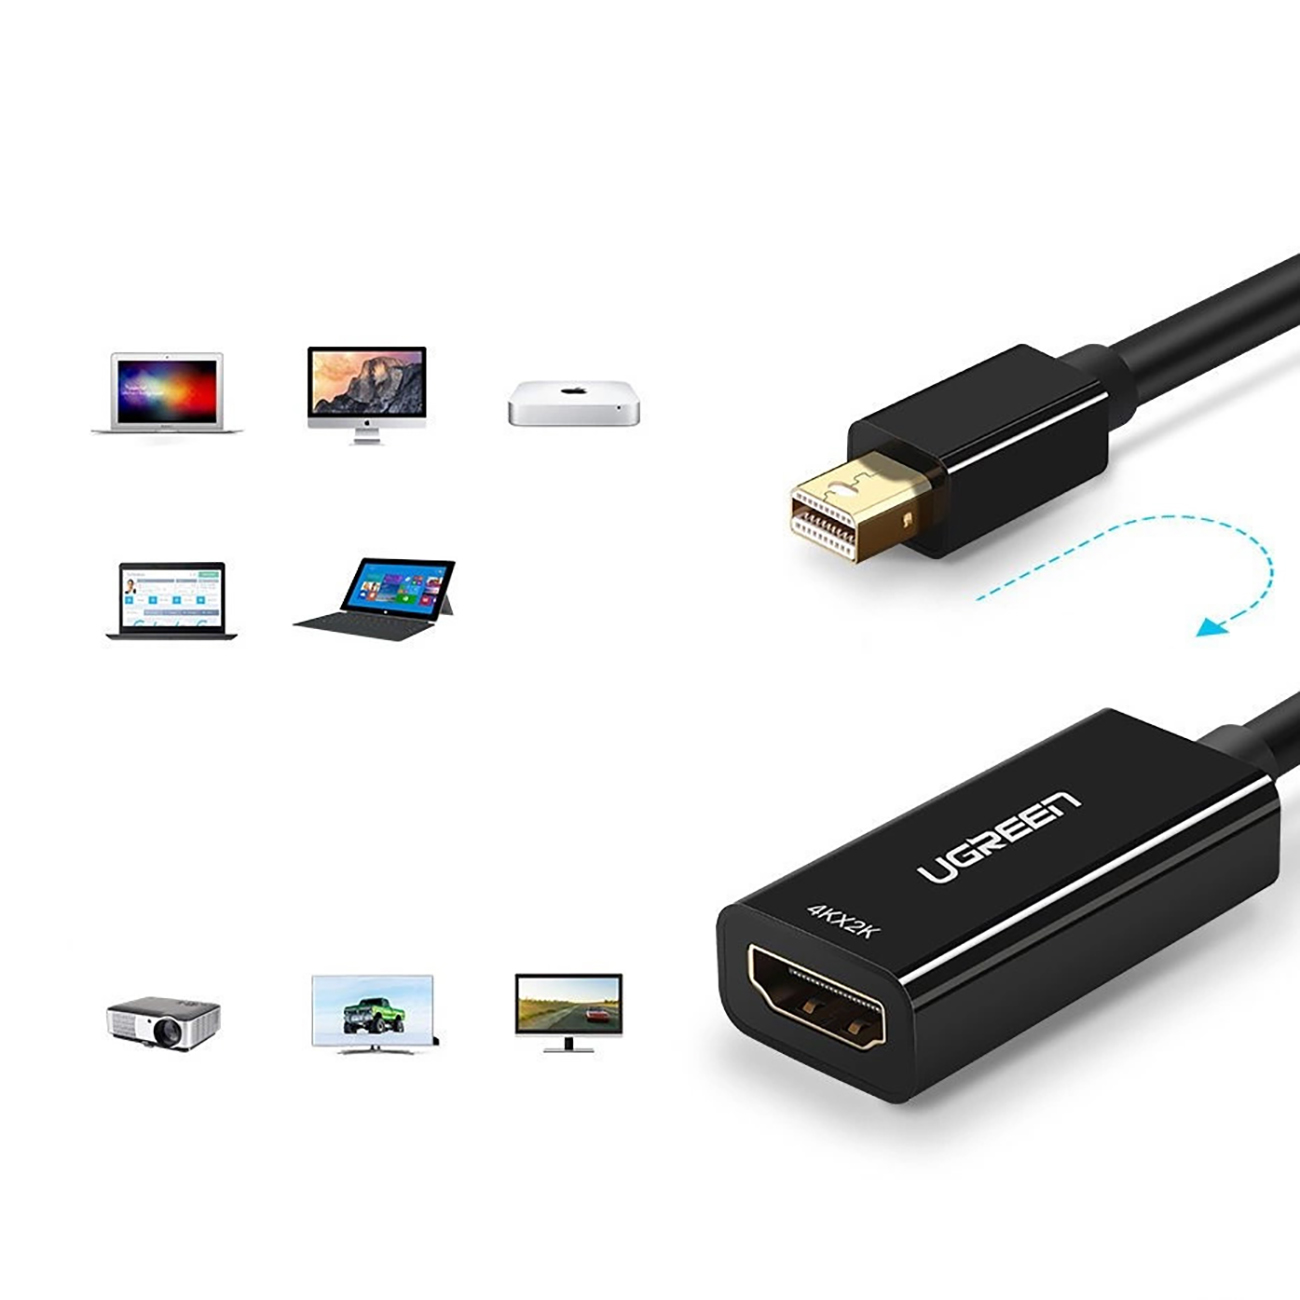 Graphic showing devices compatible with the Ugreen MD112 cable with mini DisplayPort (male) and HDMI (female) connectors with Full HD 1080p resolution